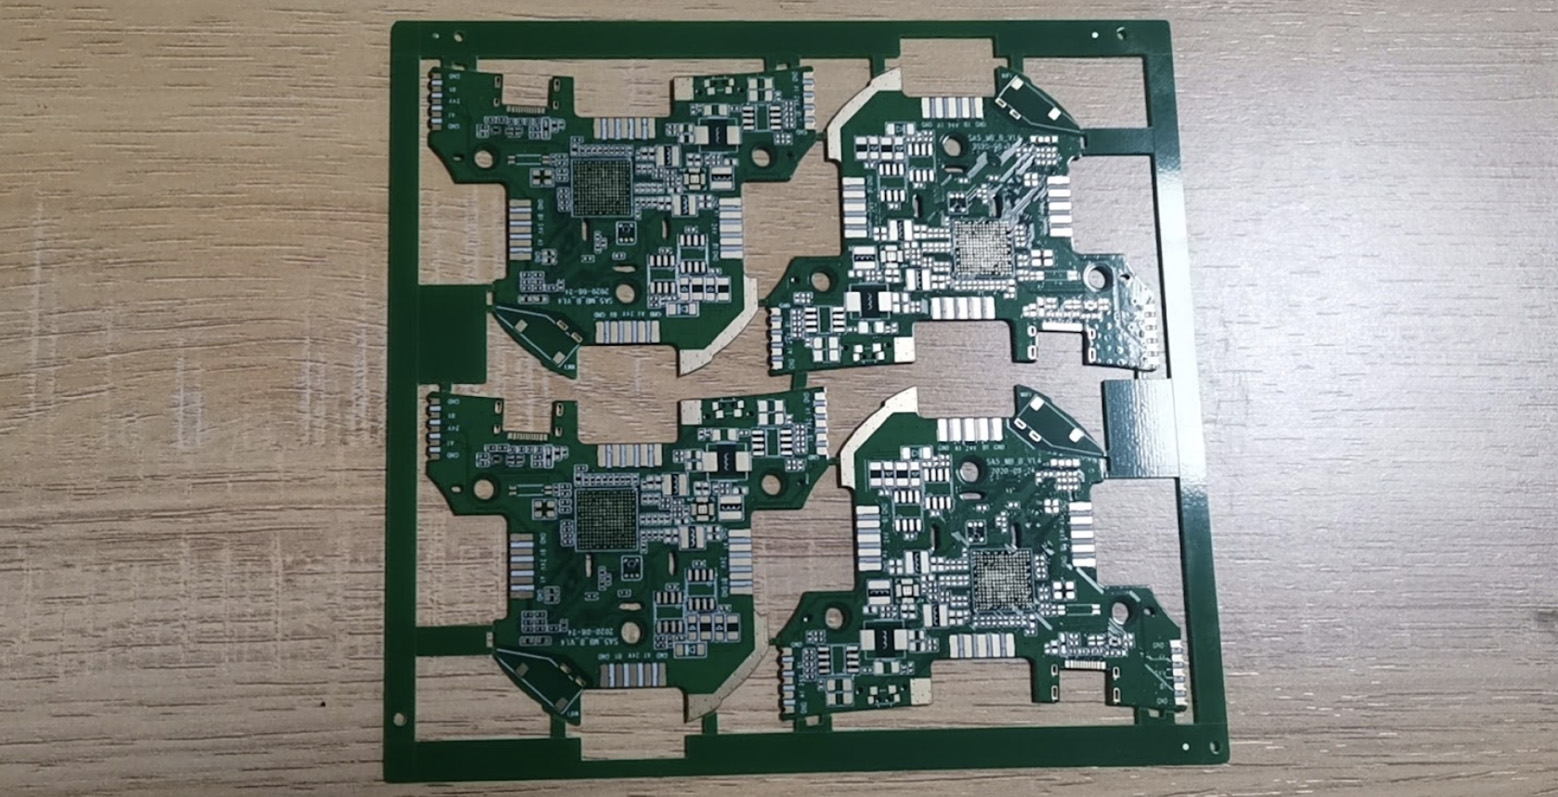 Circuit board with no components